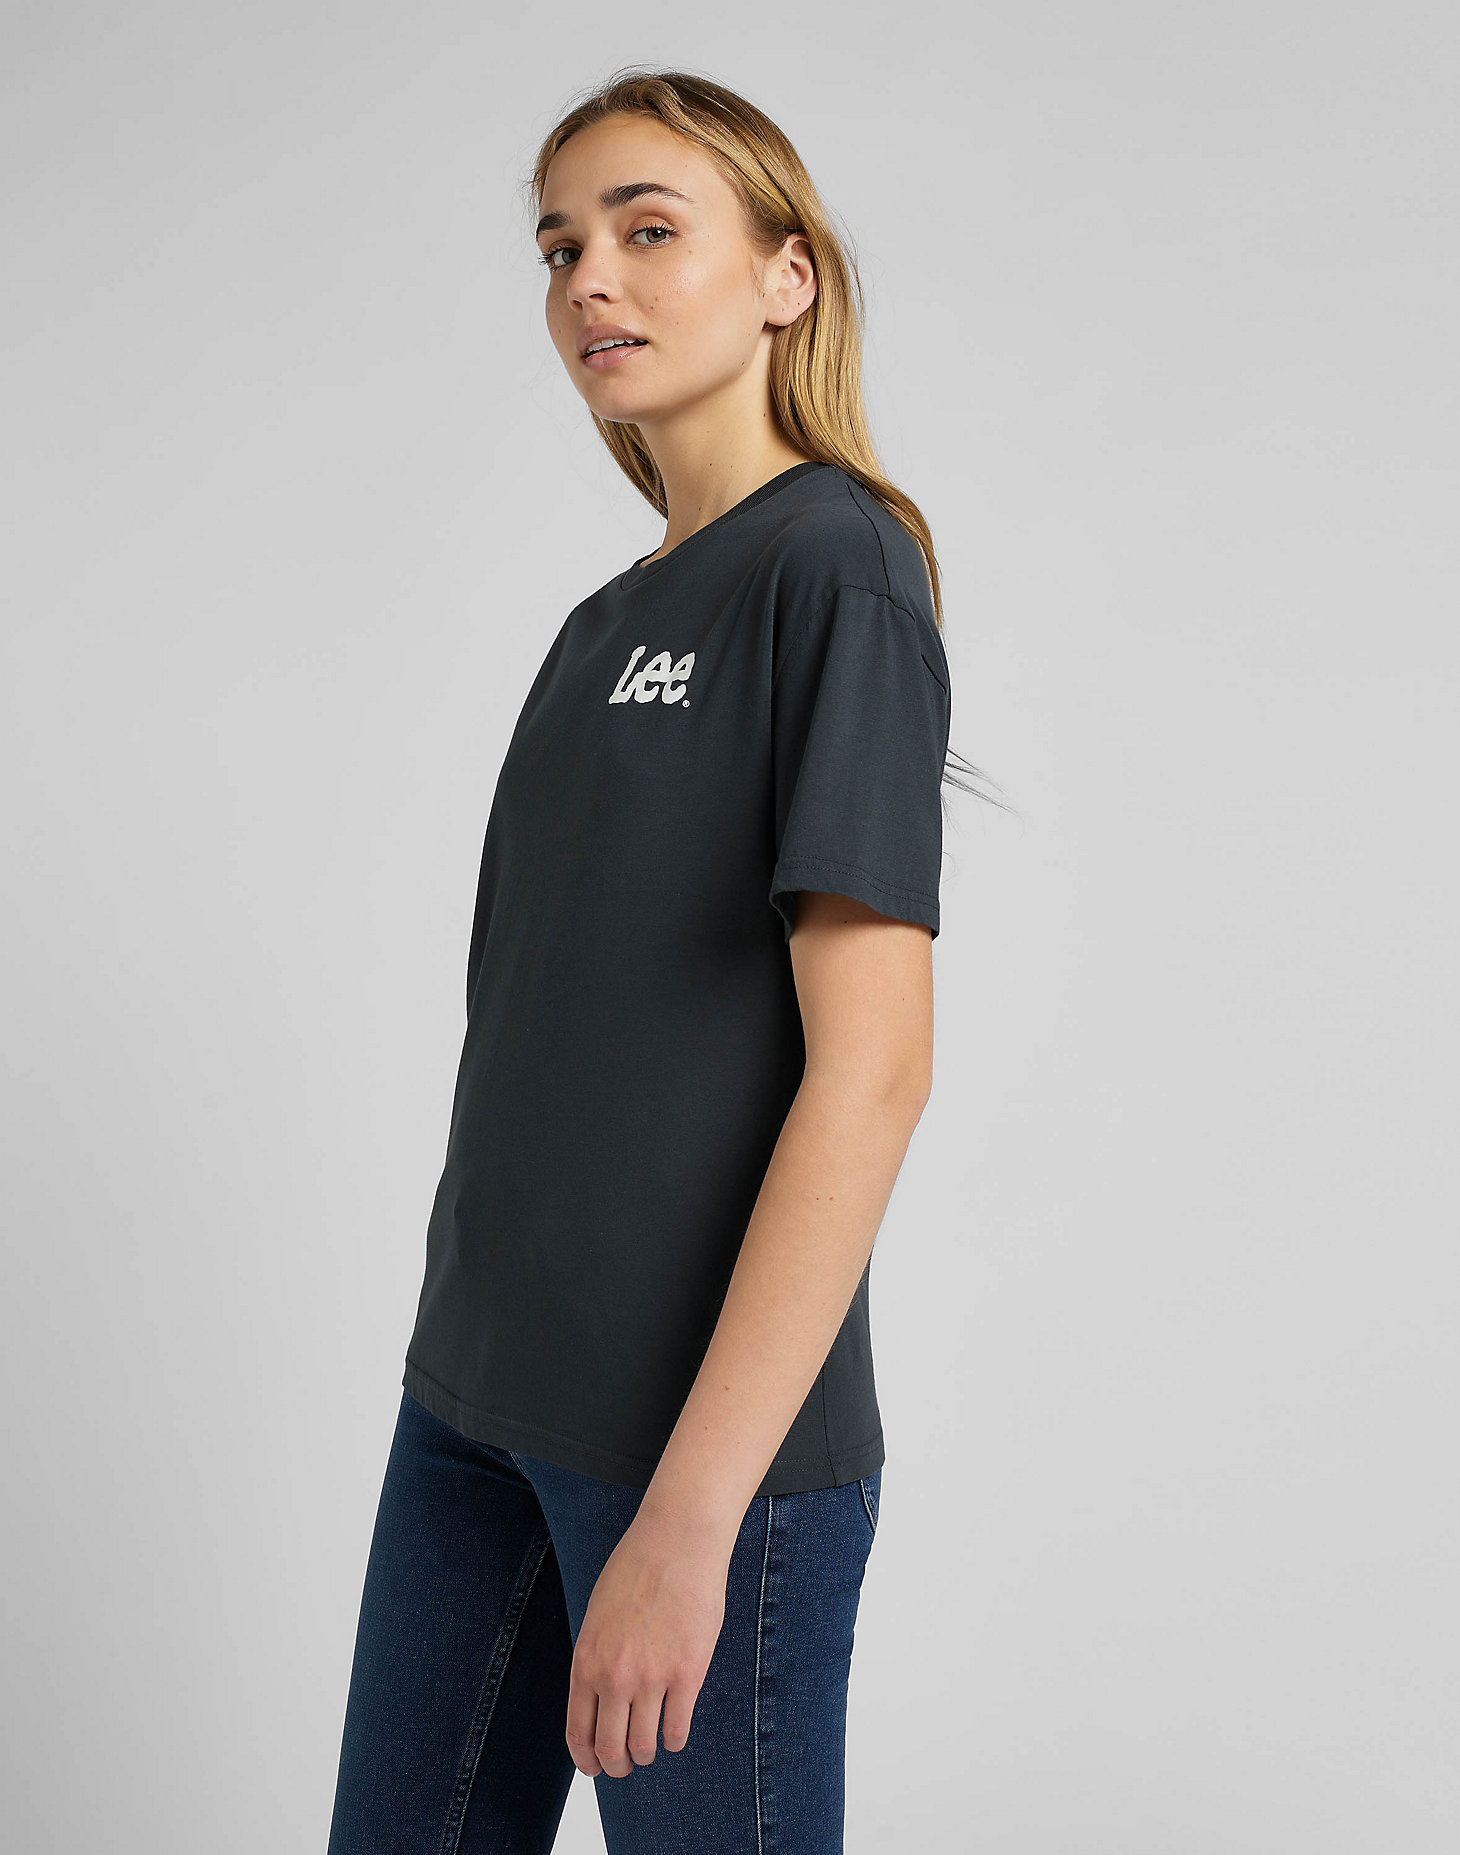 Chest Logo Tee in Charcoal alternative view 3